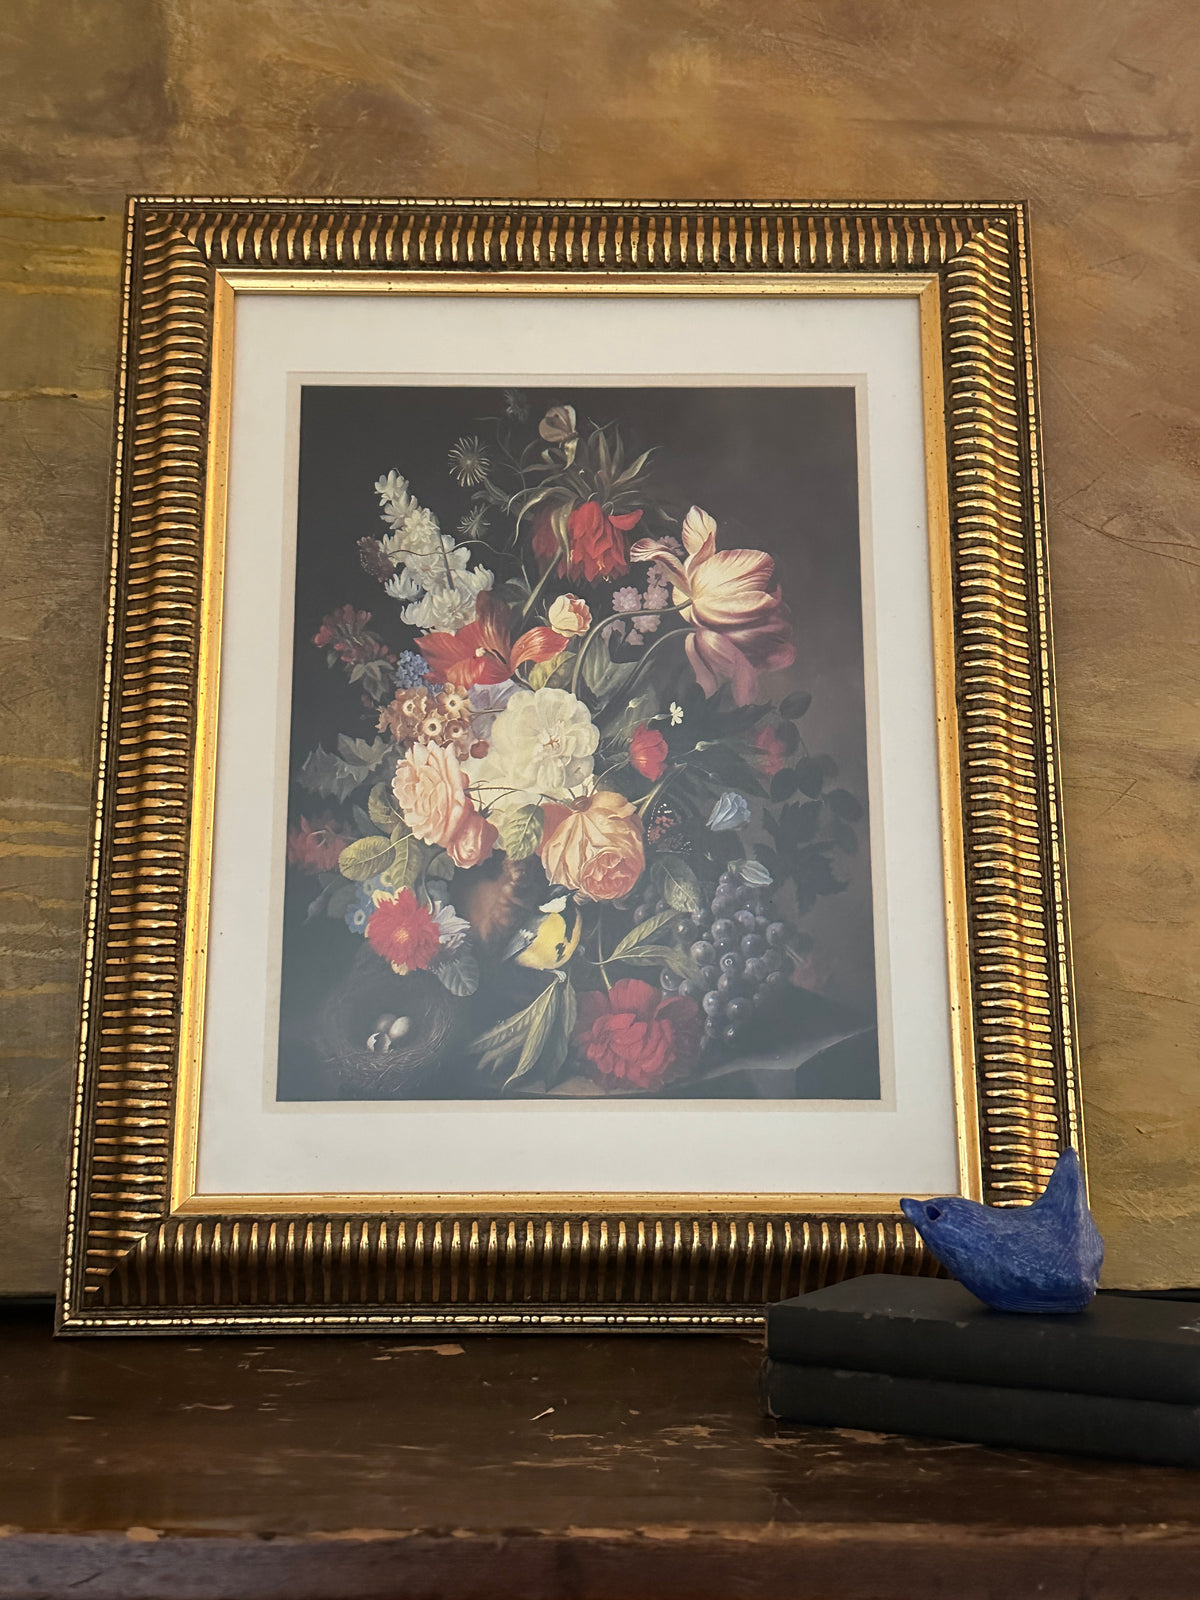 Framed Print of a Dutch Master Floral Painting